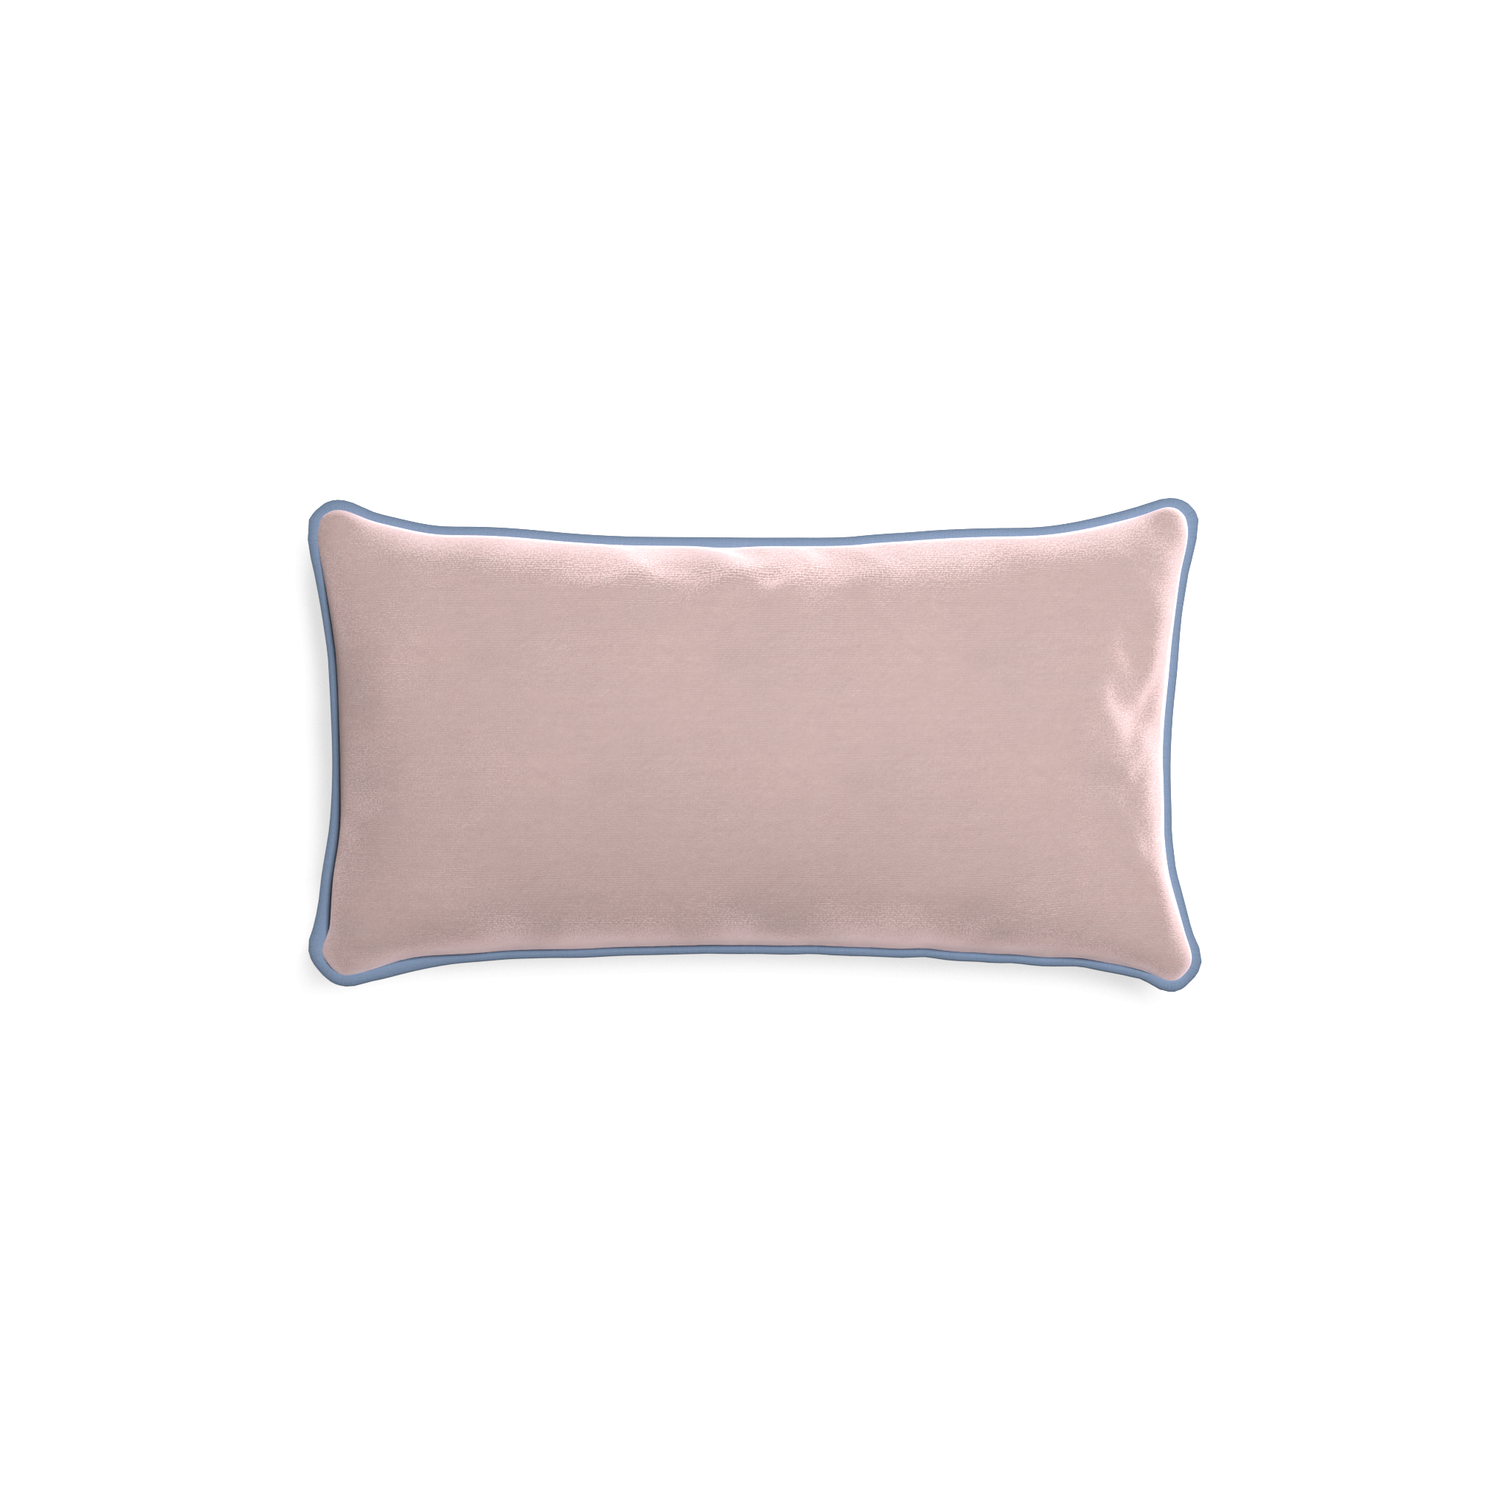 rectangle light pink velvet pillow with sky blue piping